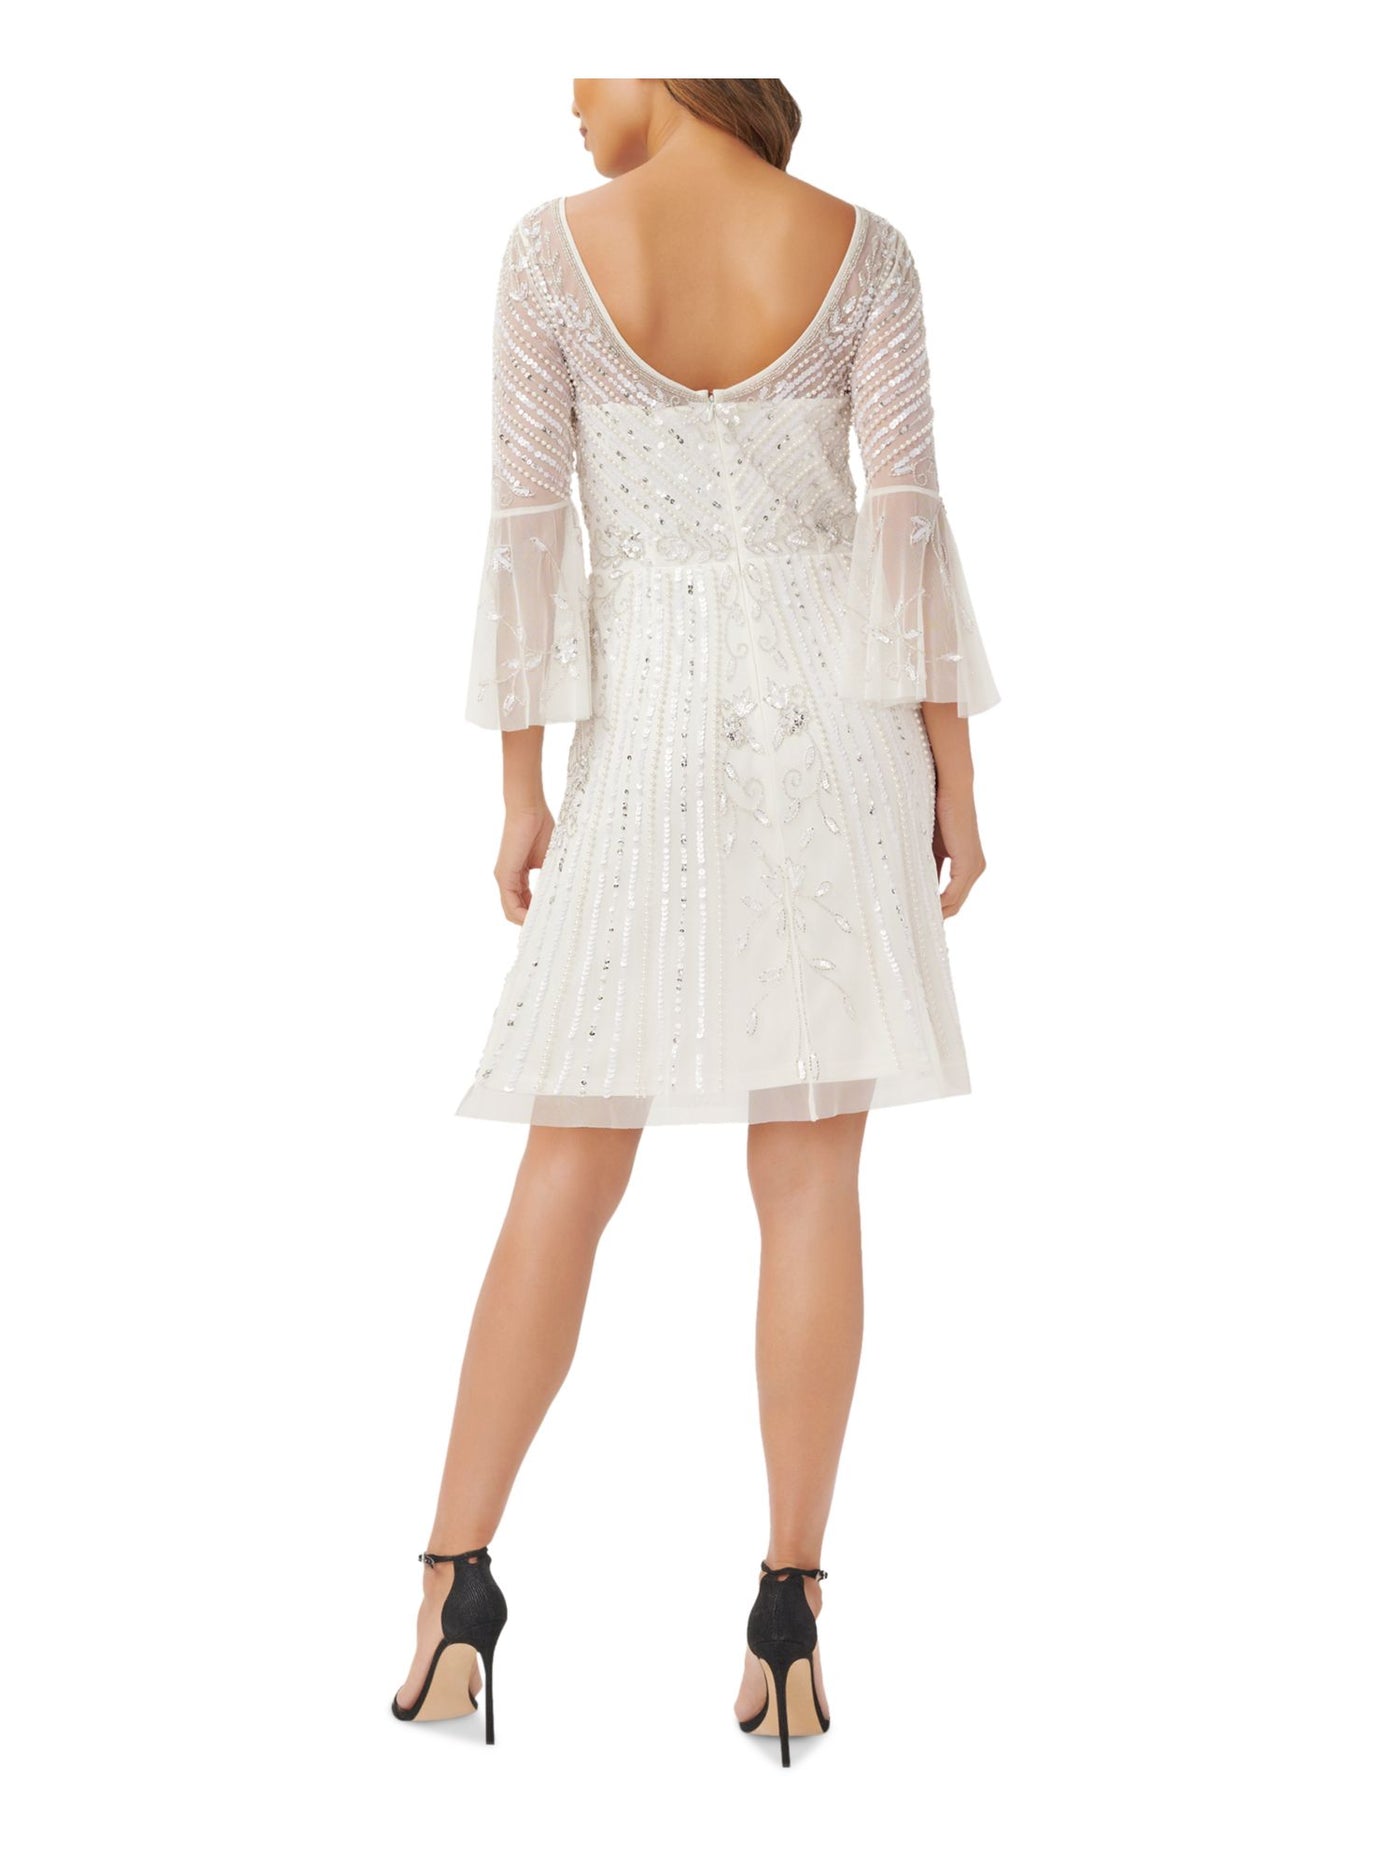 ADRIANNA PAPELL Womens Ivory Beaded Sequined Lined Zippered Long Sleeve Crew Neck Short Cocktail Fit + Flare Dress 2